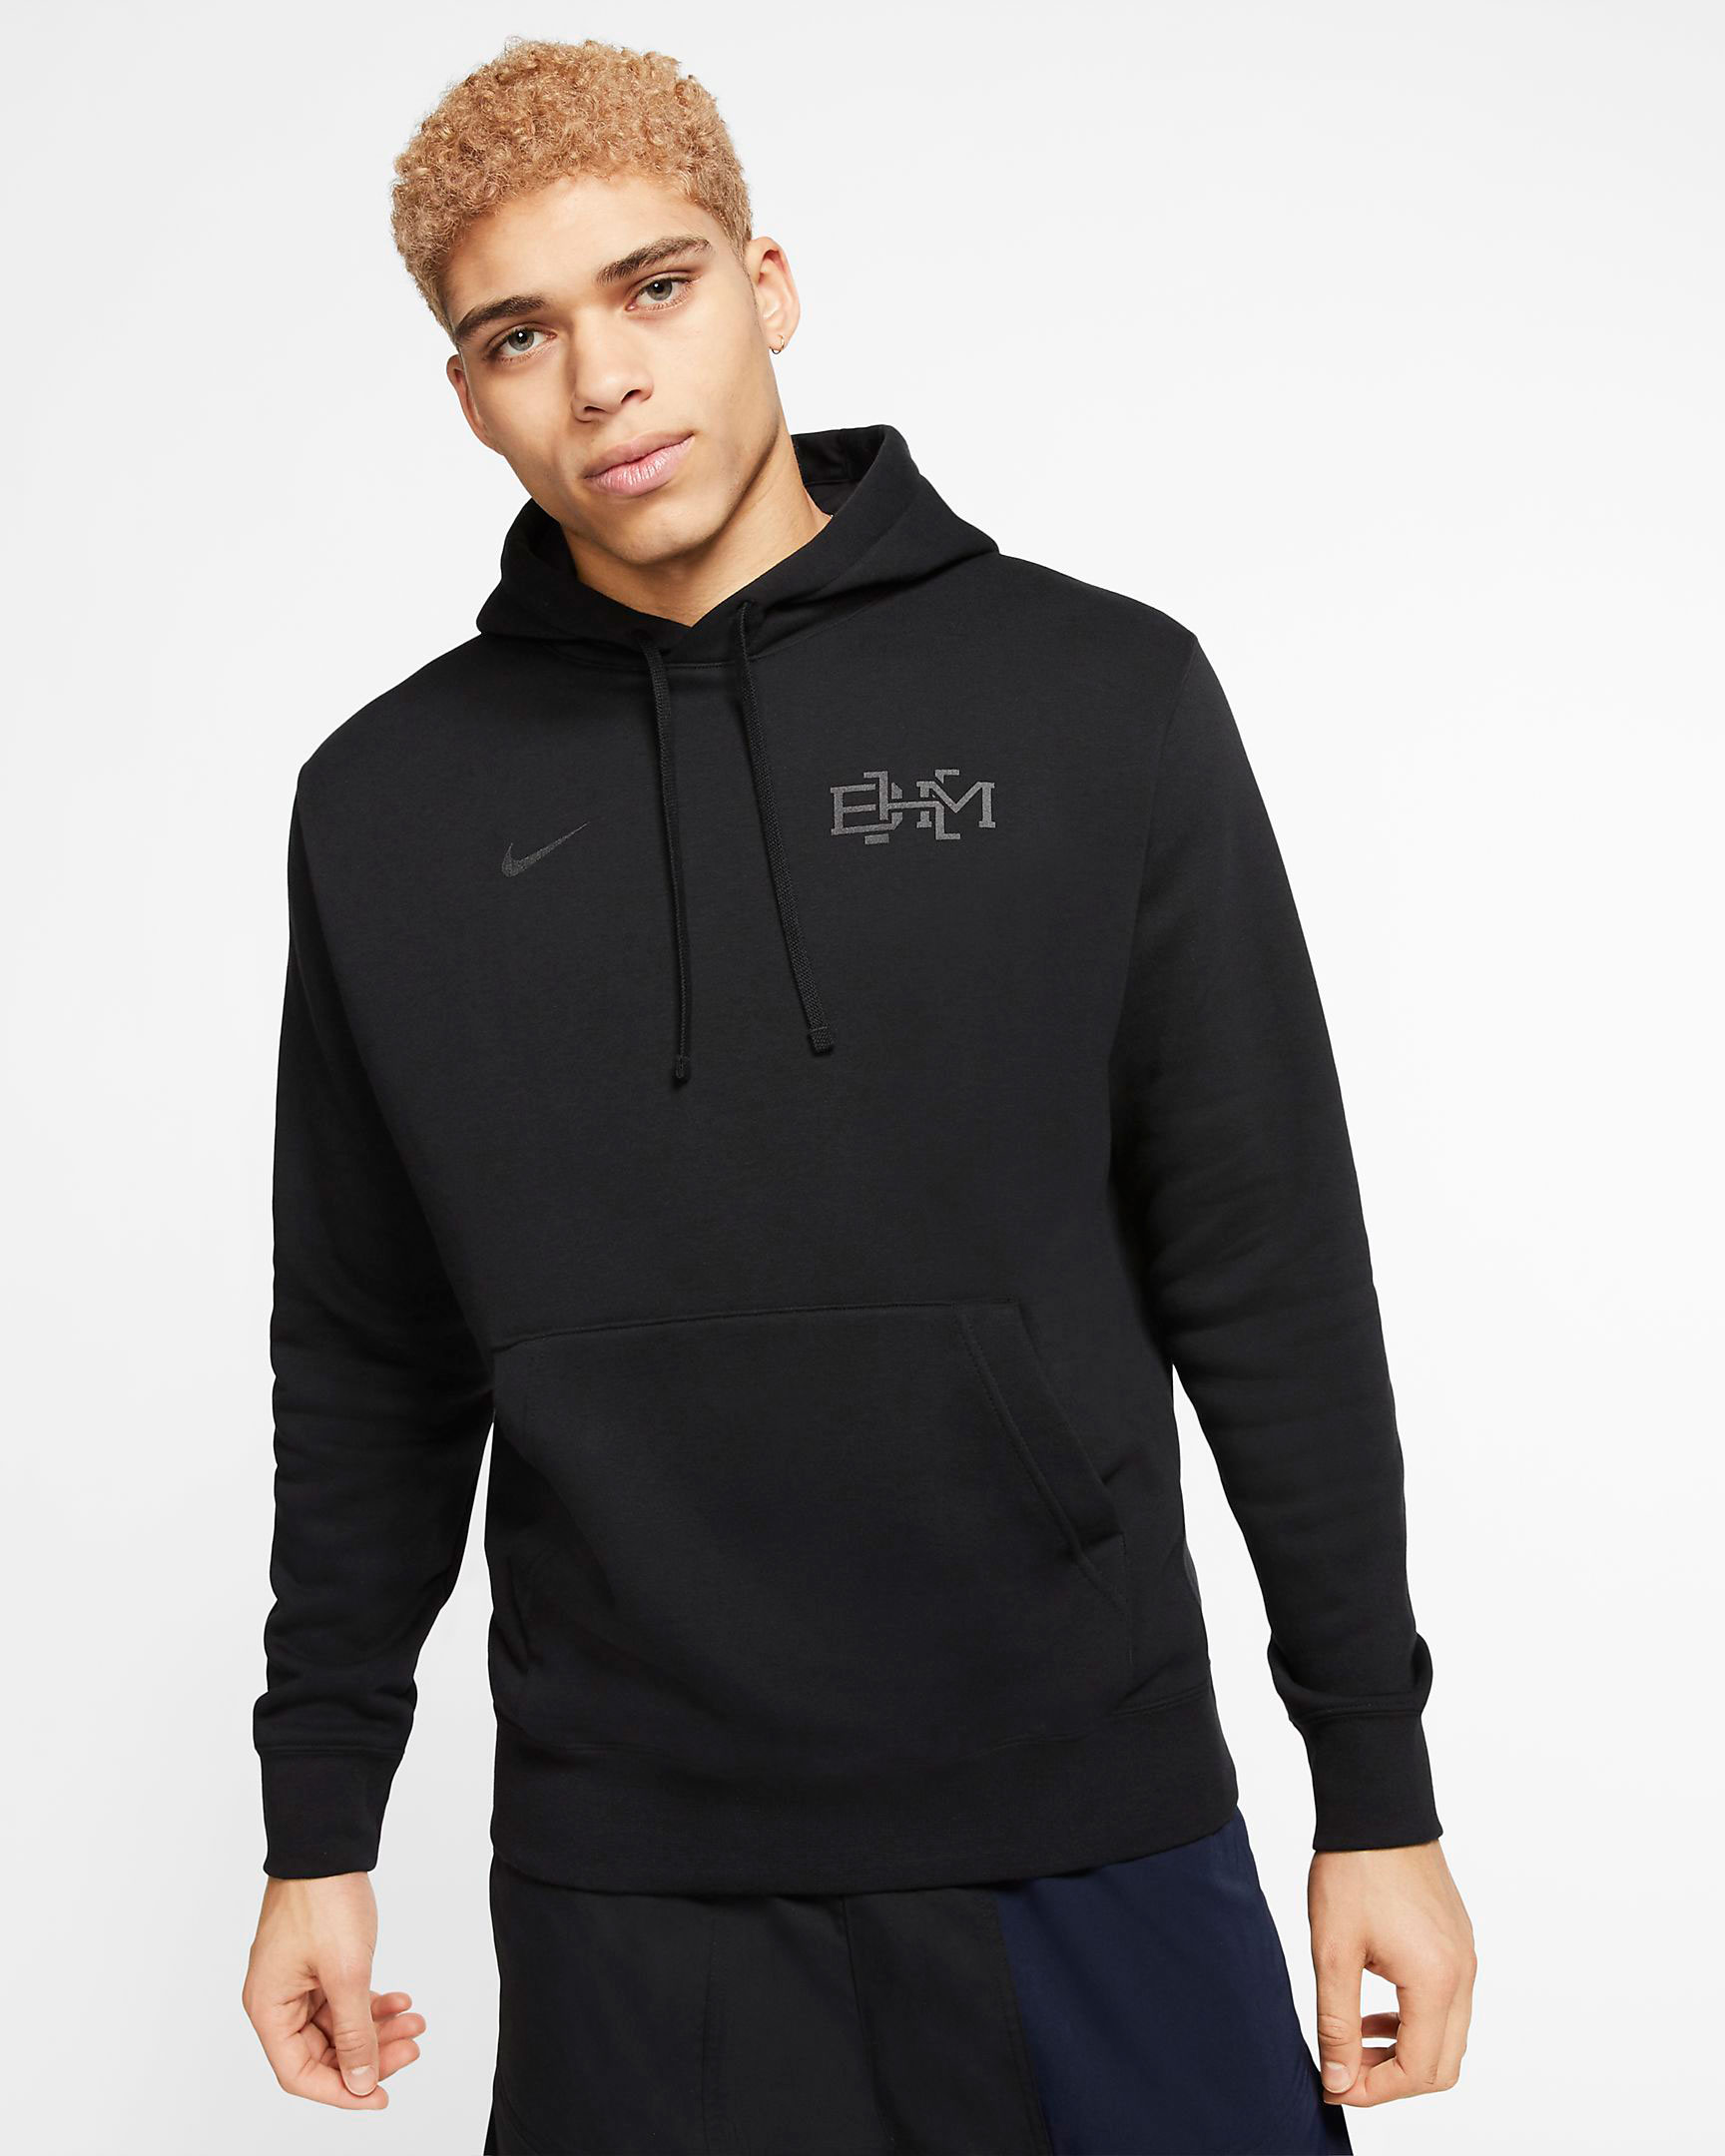 Nike BHM 2020 Sneakers and Clothing | SneakerFits.com